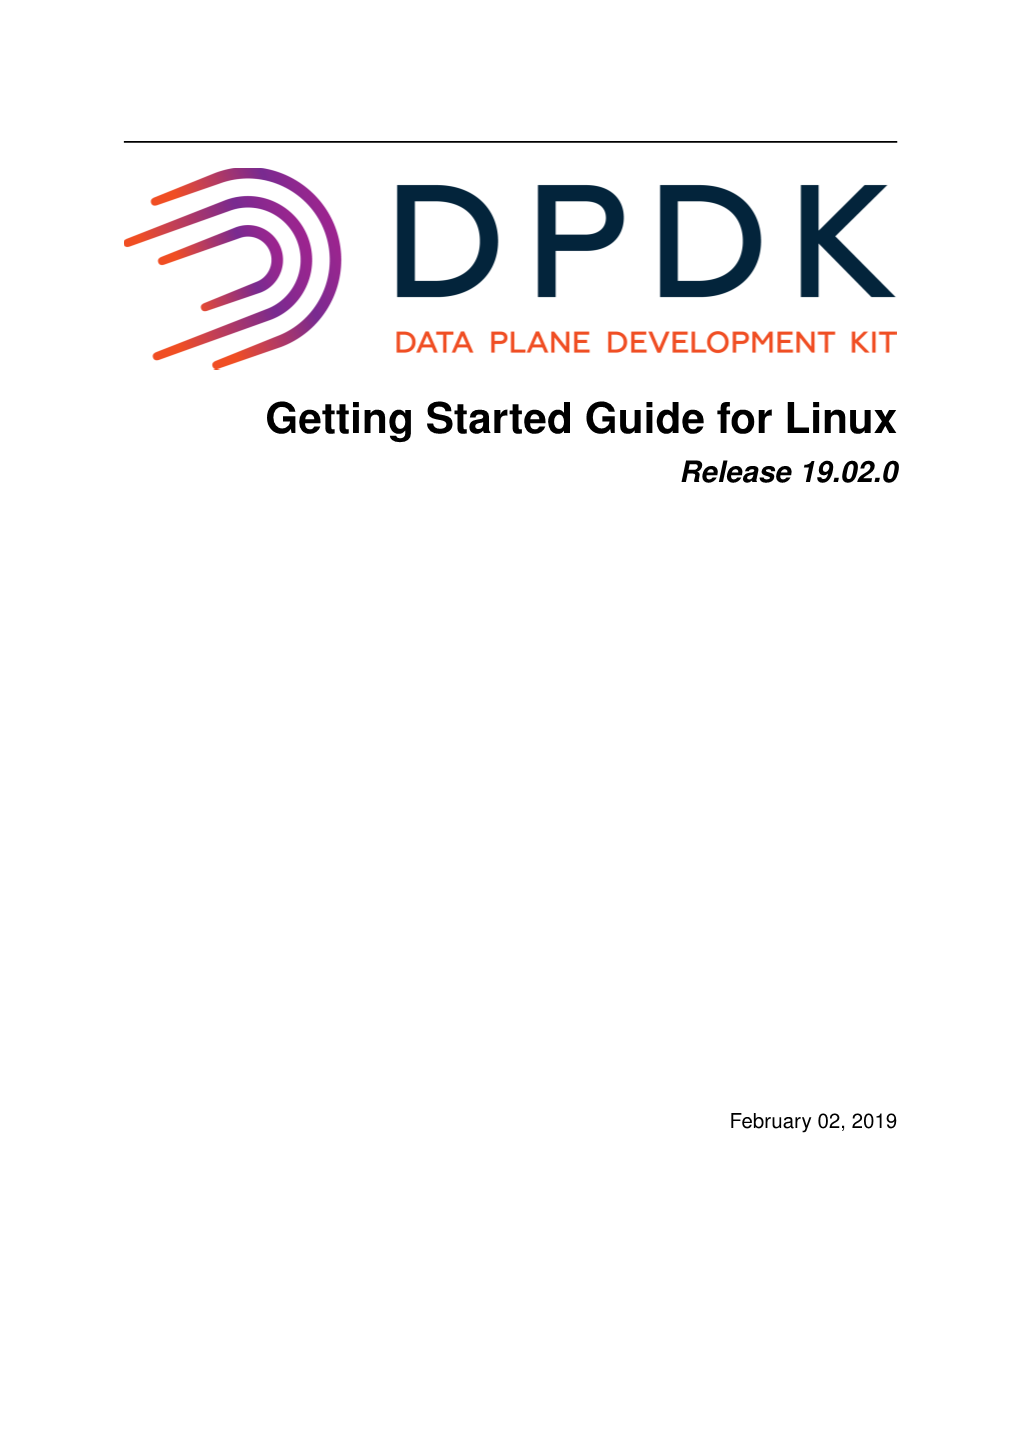 Getting Started Guide for Linux Release 19.02.0